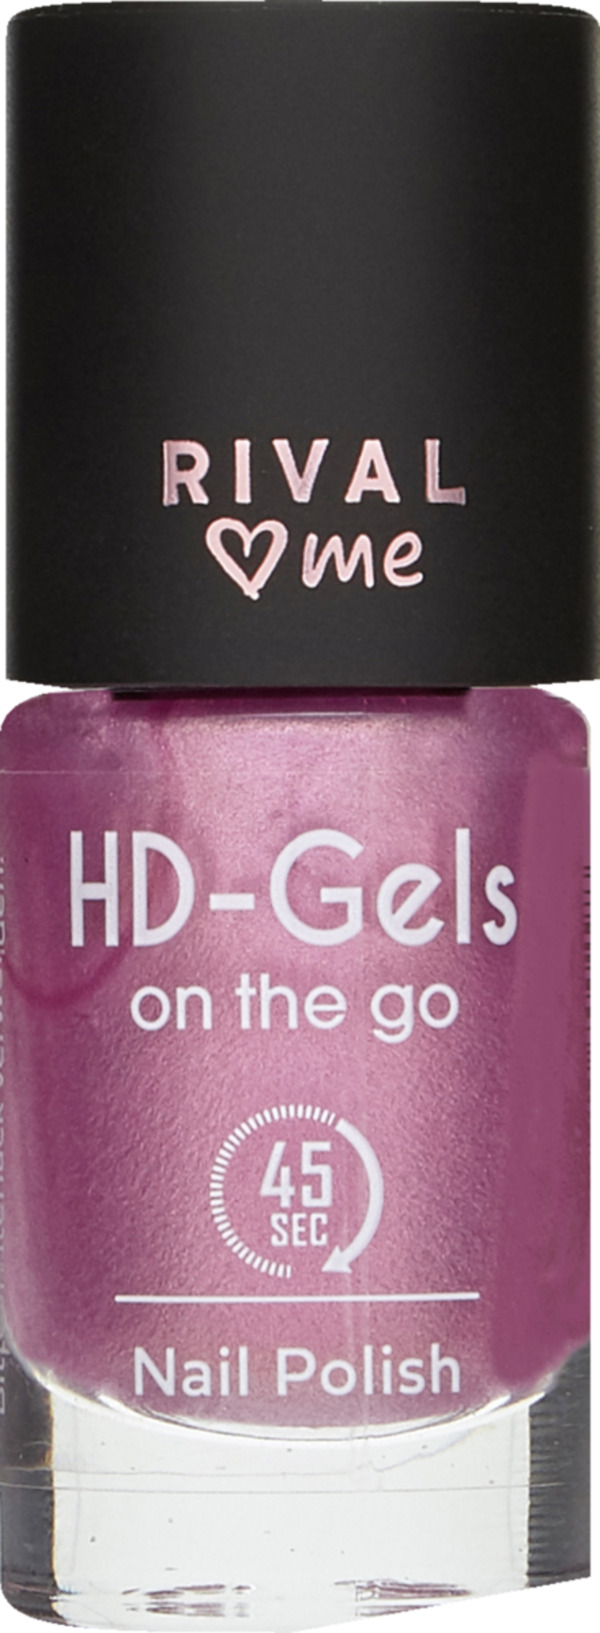 Bild 1 von RIVAL loves me HD-Gels on the go 16 lazy daisy